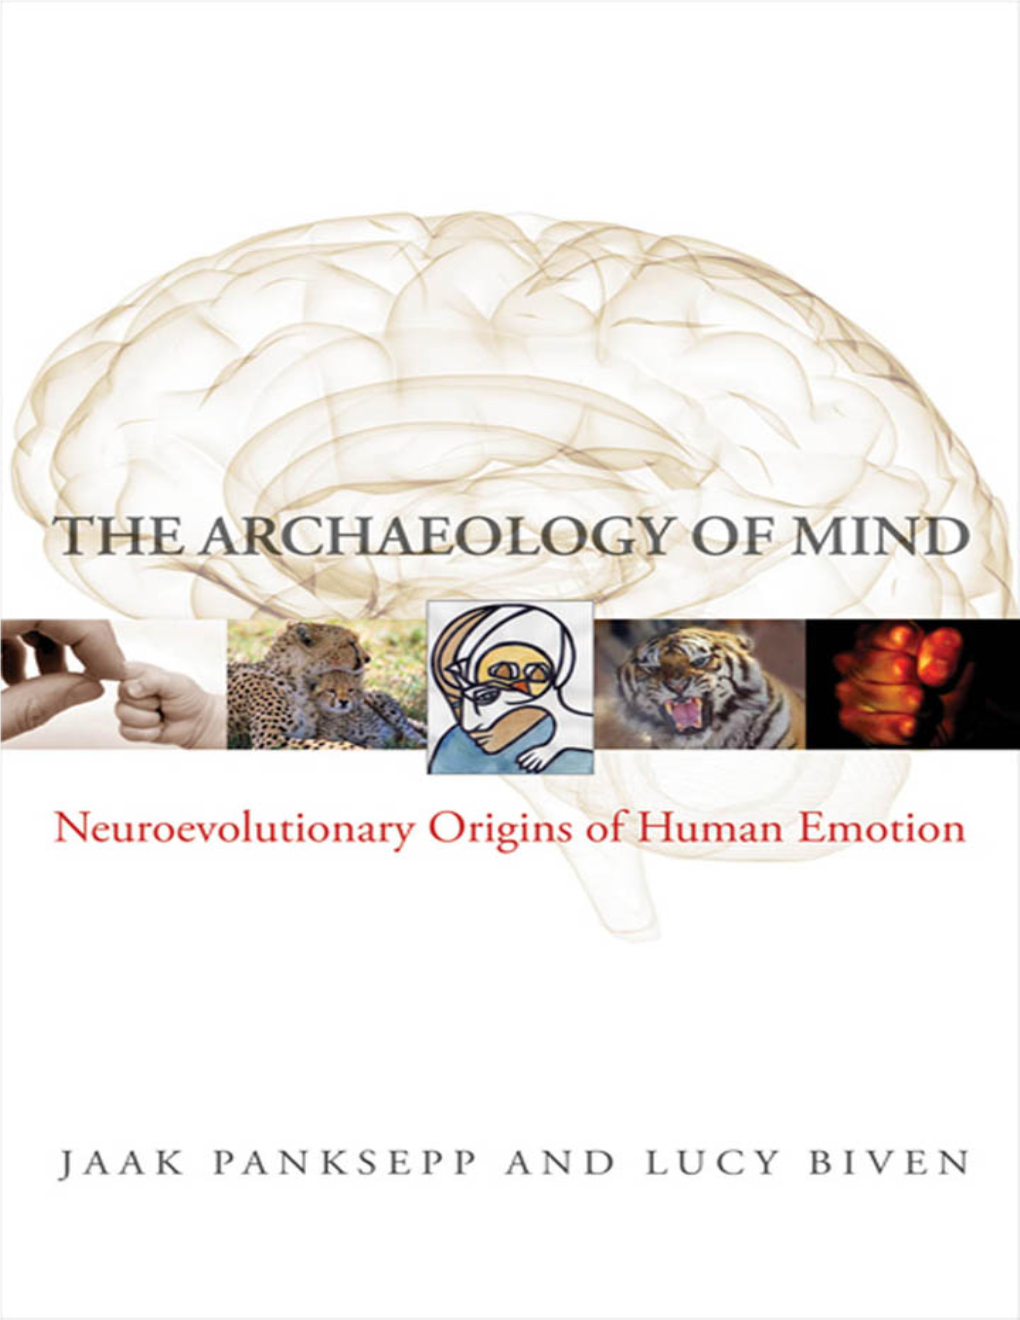 The Archaeology of Mind the Norton Series on Interpersonal Neurobiology Allan N